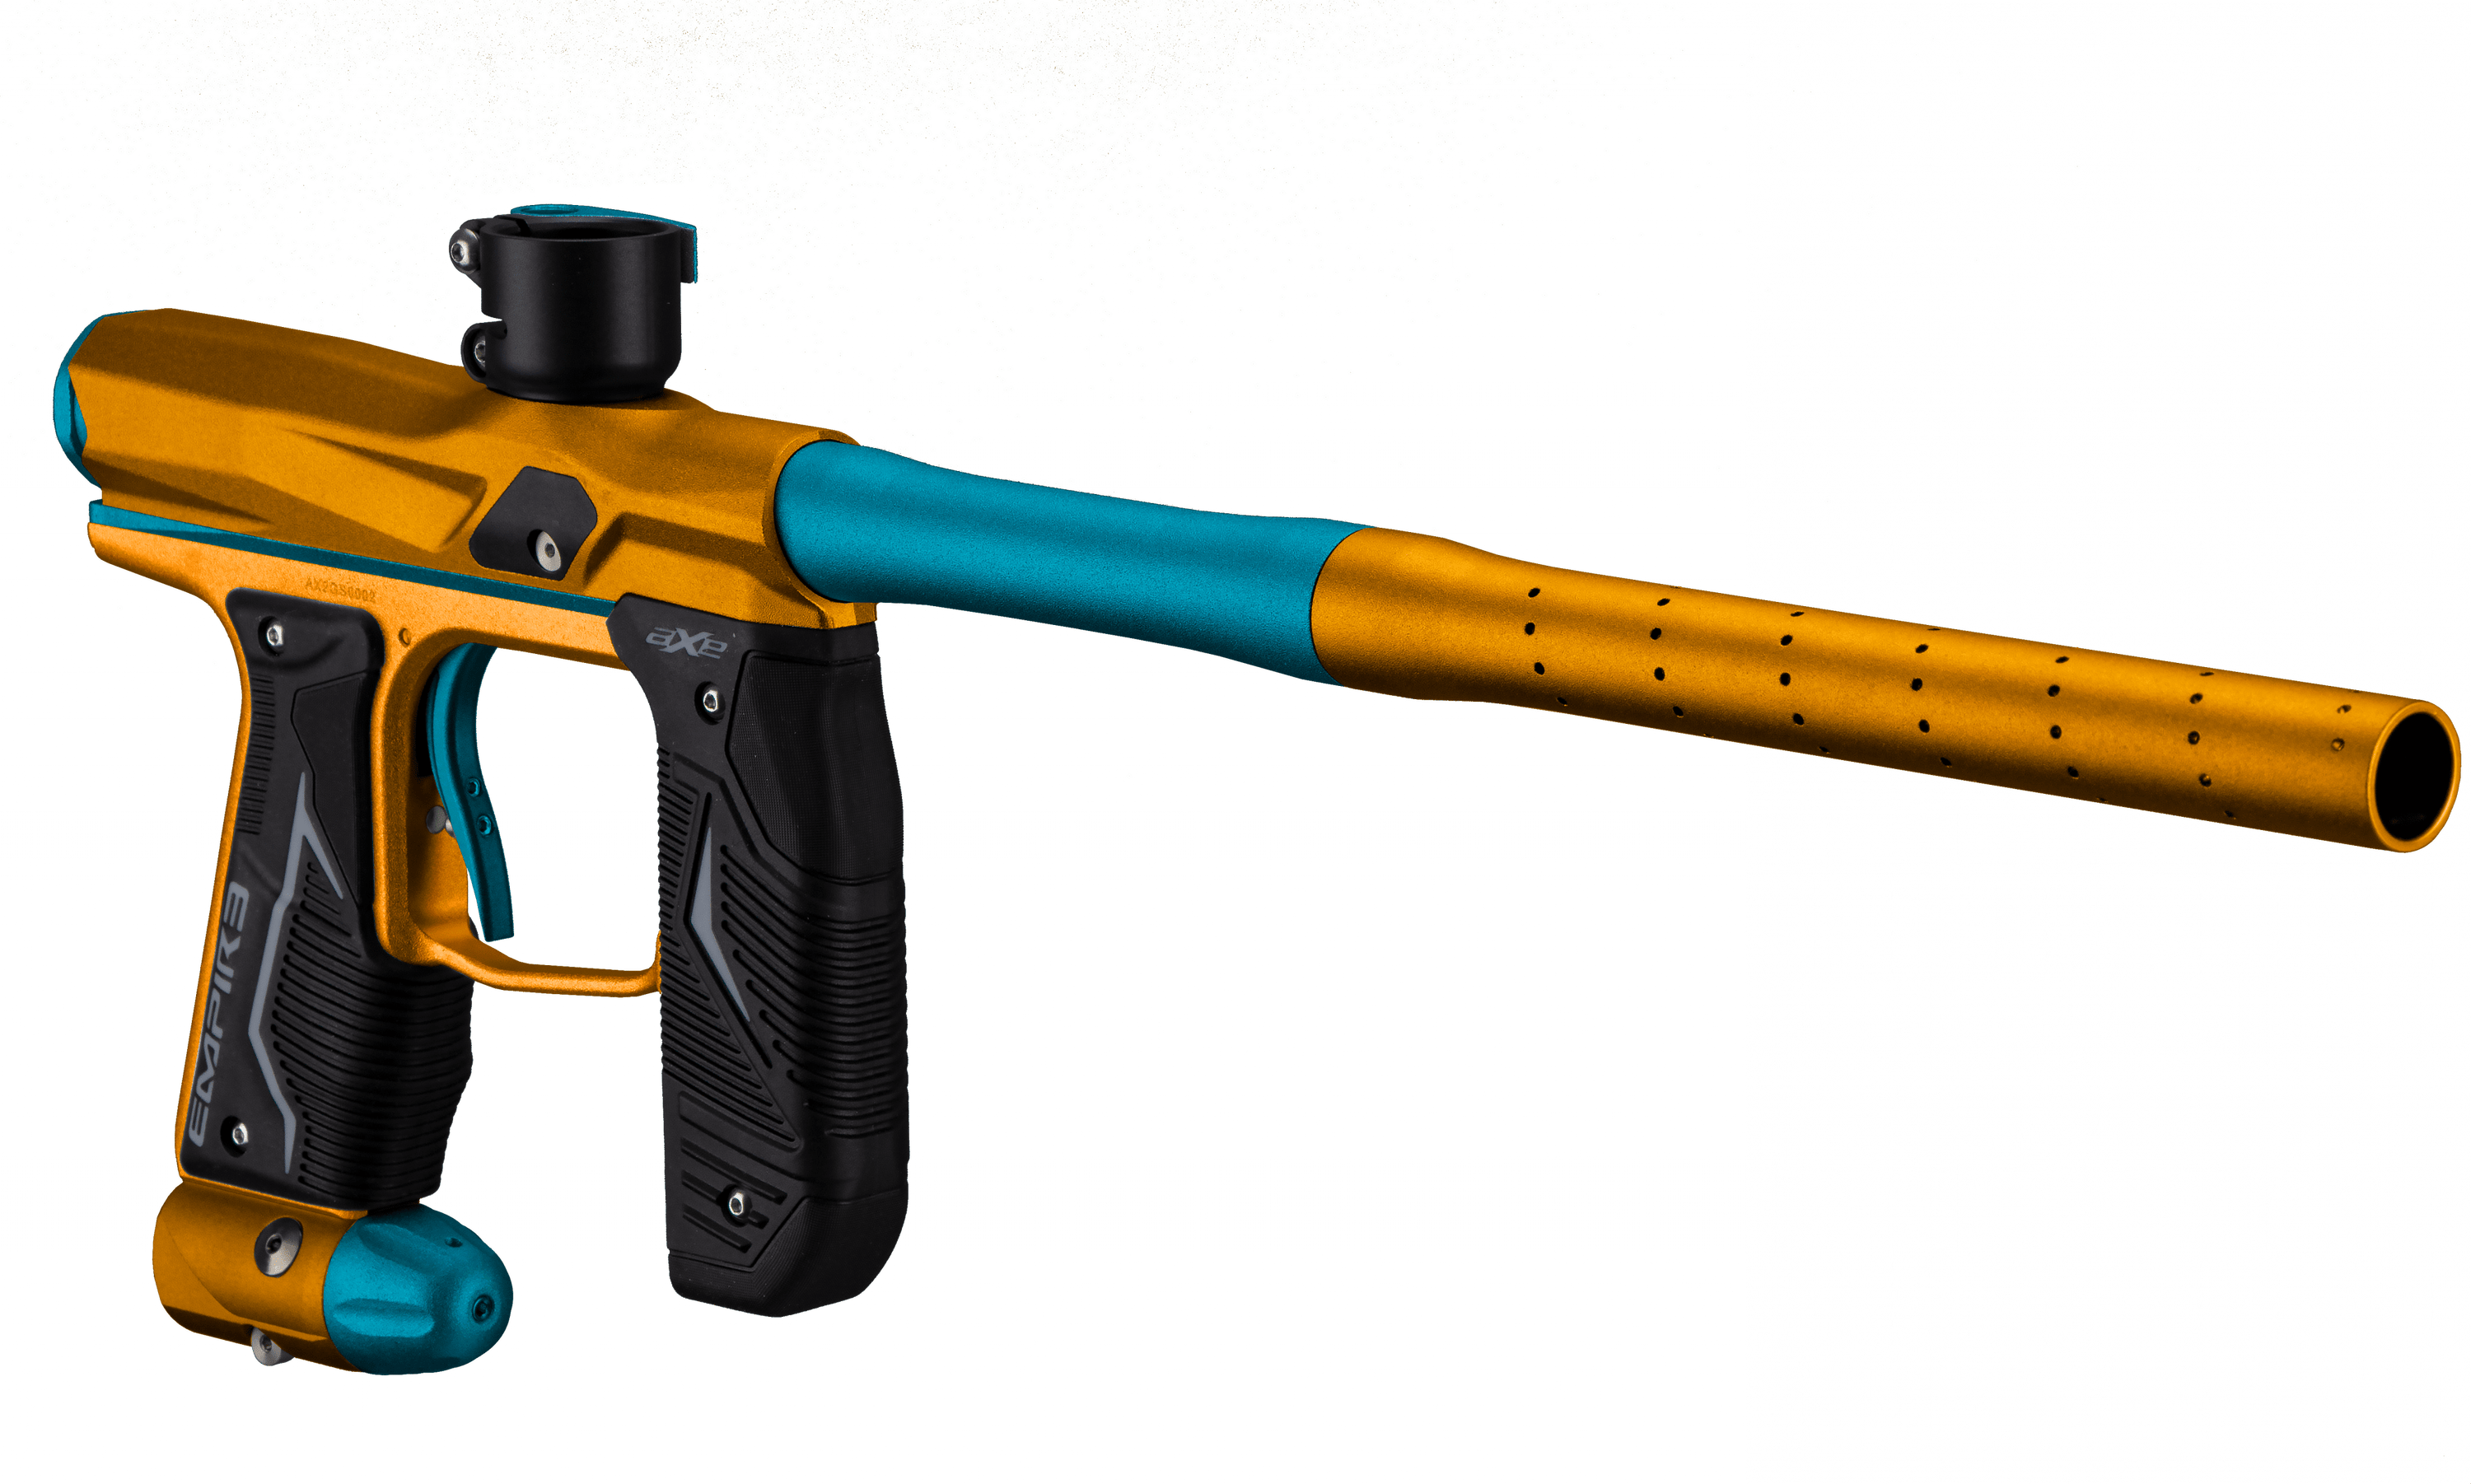 Empire Axe 2.0 Marker - Dust Orange/Dust Aqua - Eminent Paintball And Airsoft